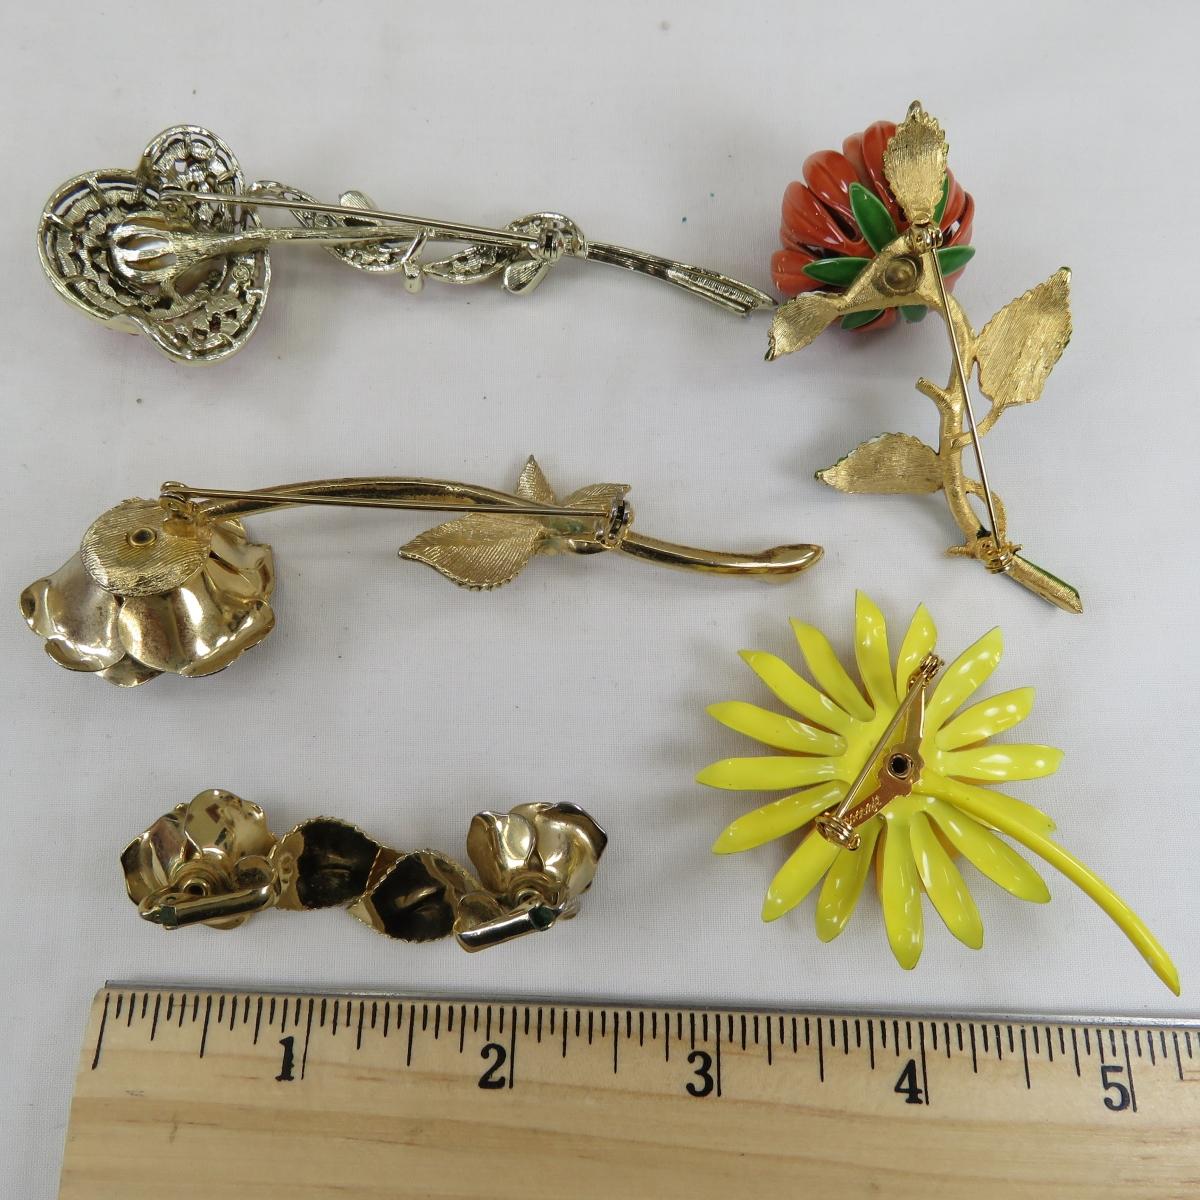 Vintage Floral Brooches- Some Signed